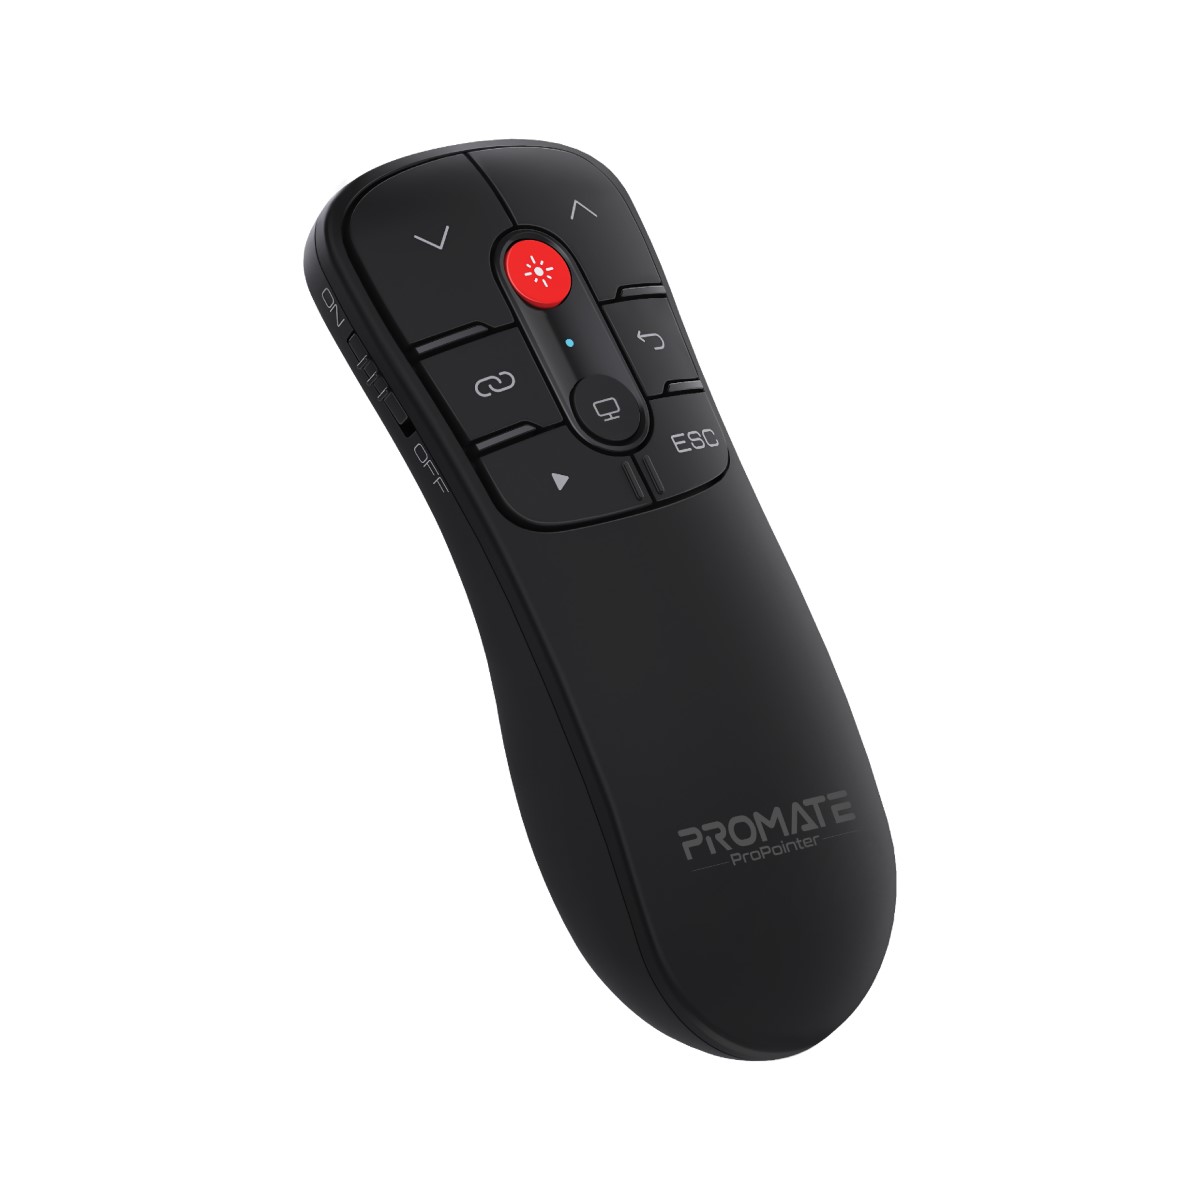 Promate Wireless Presenter with Red Laser Pointer, 2.4GHz RF, Dual USB-C?/ USB Dongles and Functional Buttons, ProPointer